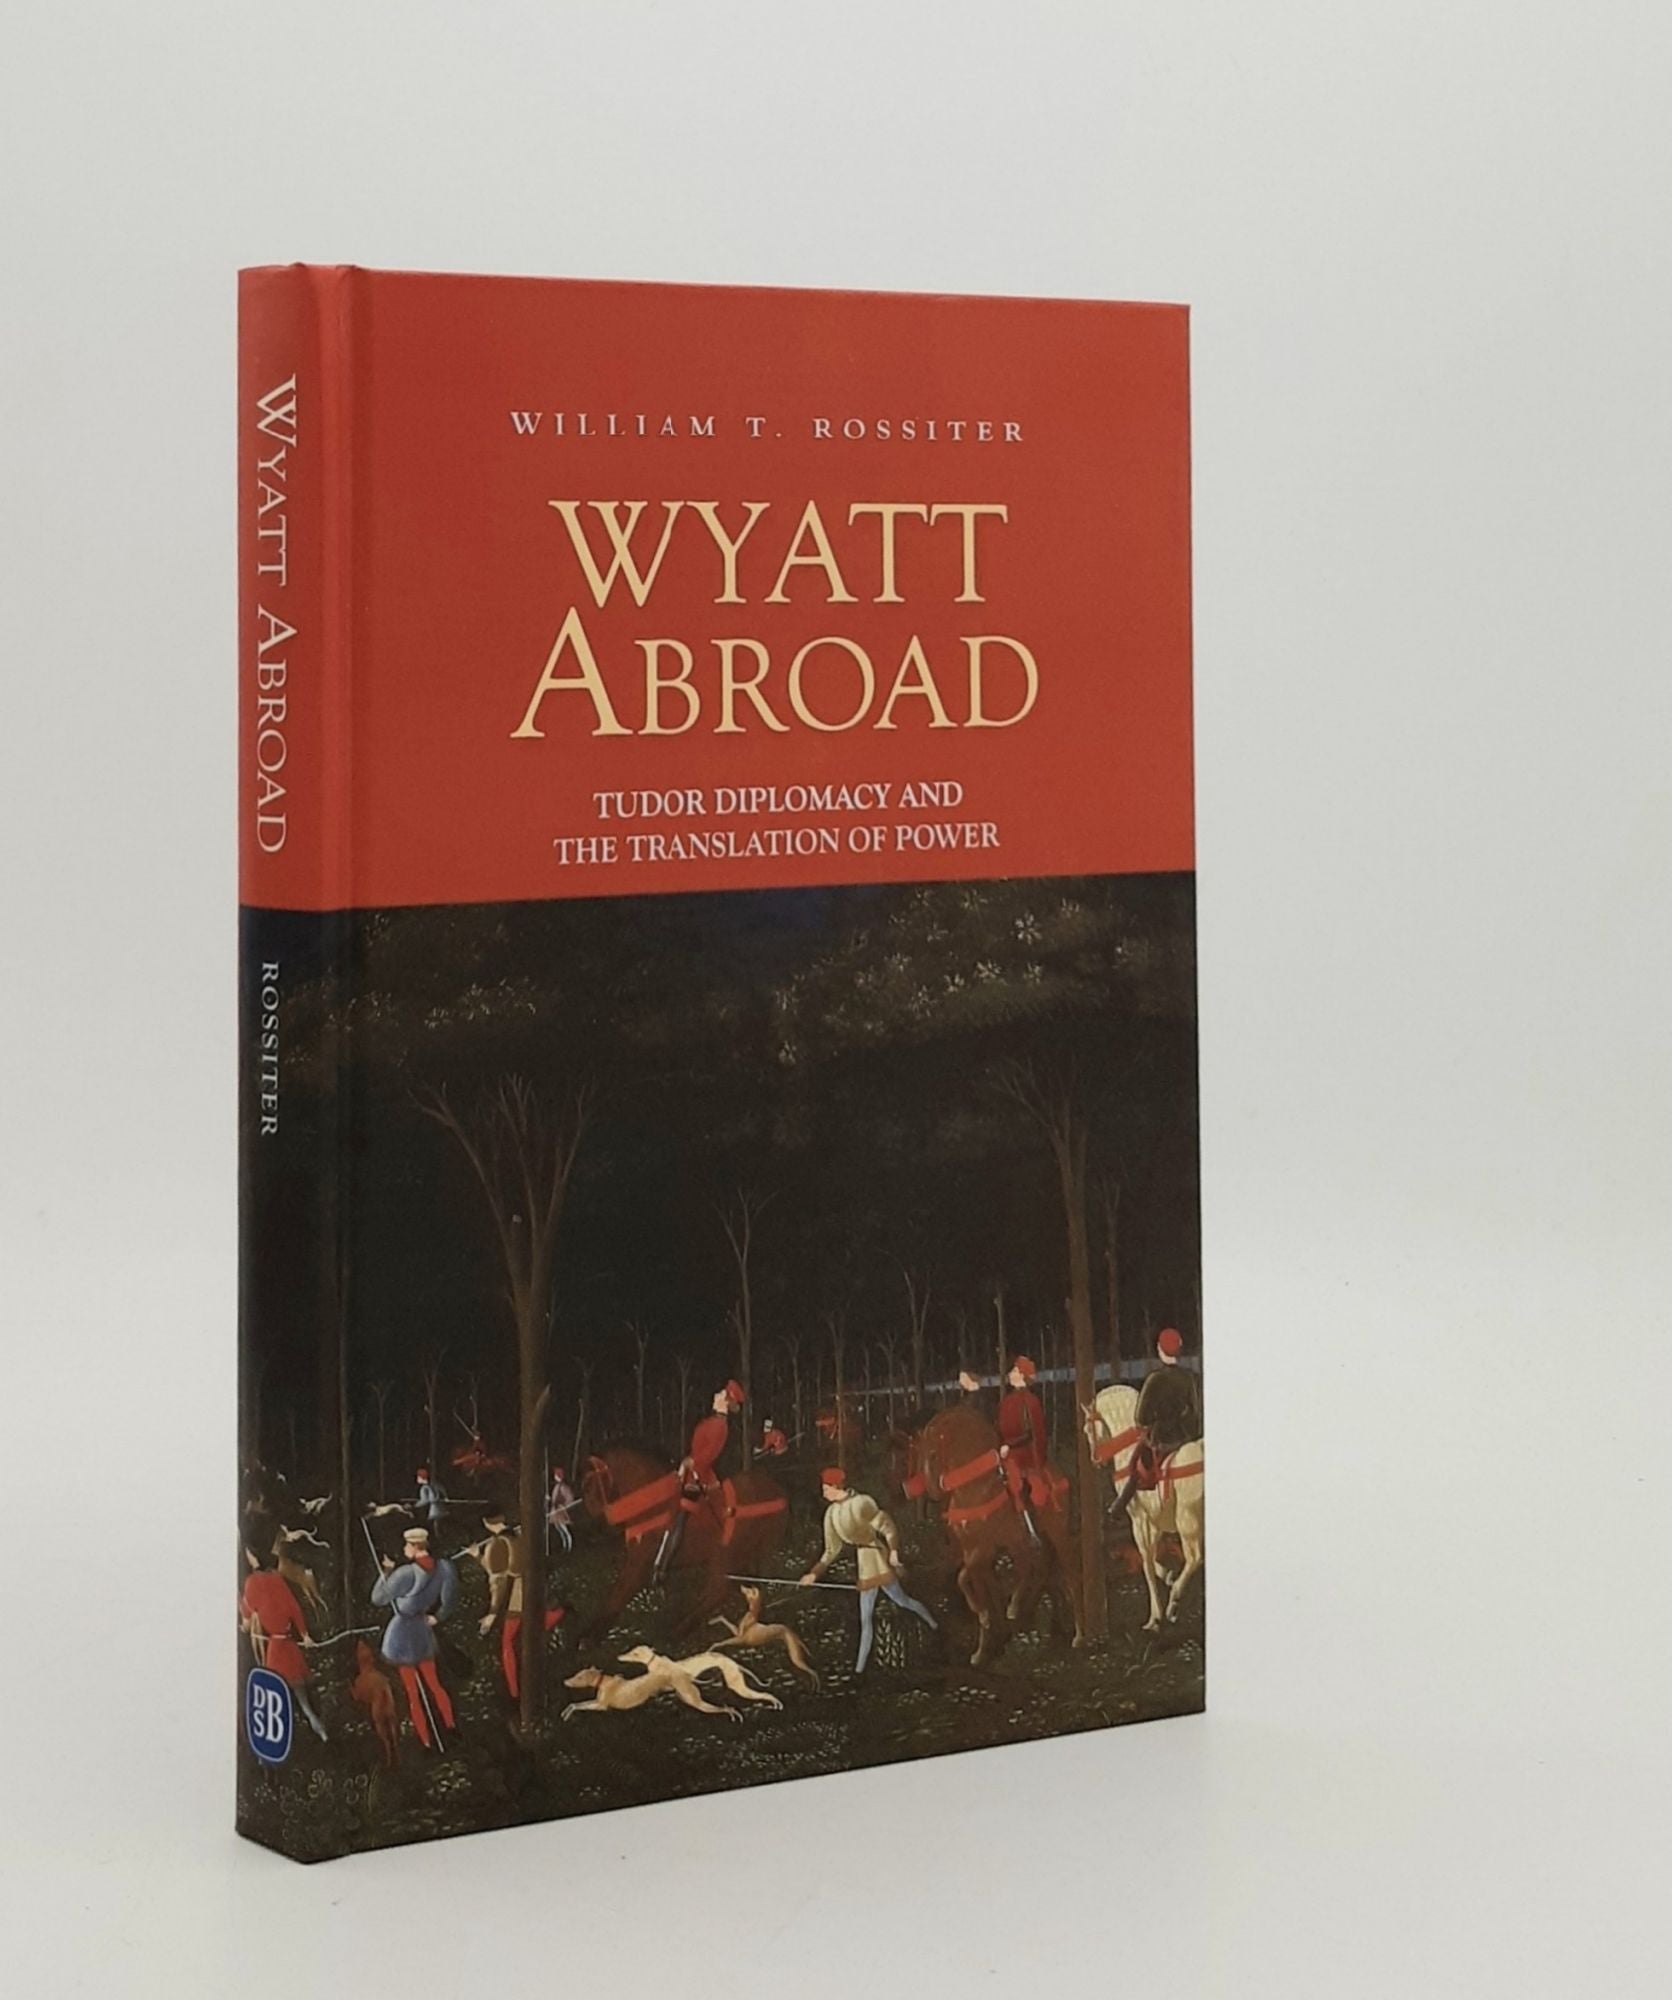 ROSSITER William T. - Wyatt Abroad Tudor Diplomacy and the Translation of Power (Studies in Renaissance Literature Volume 32)